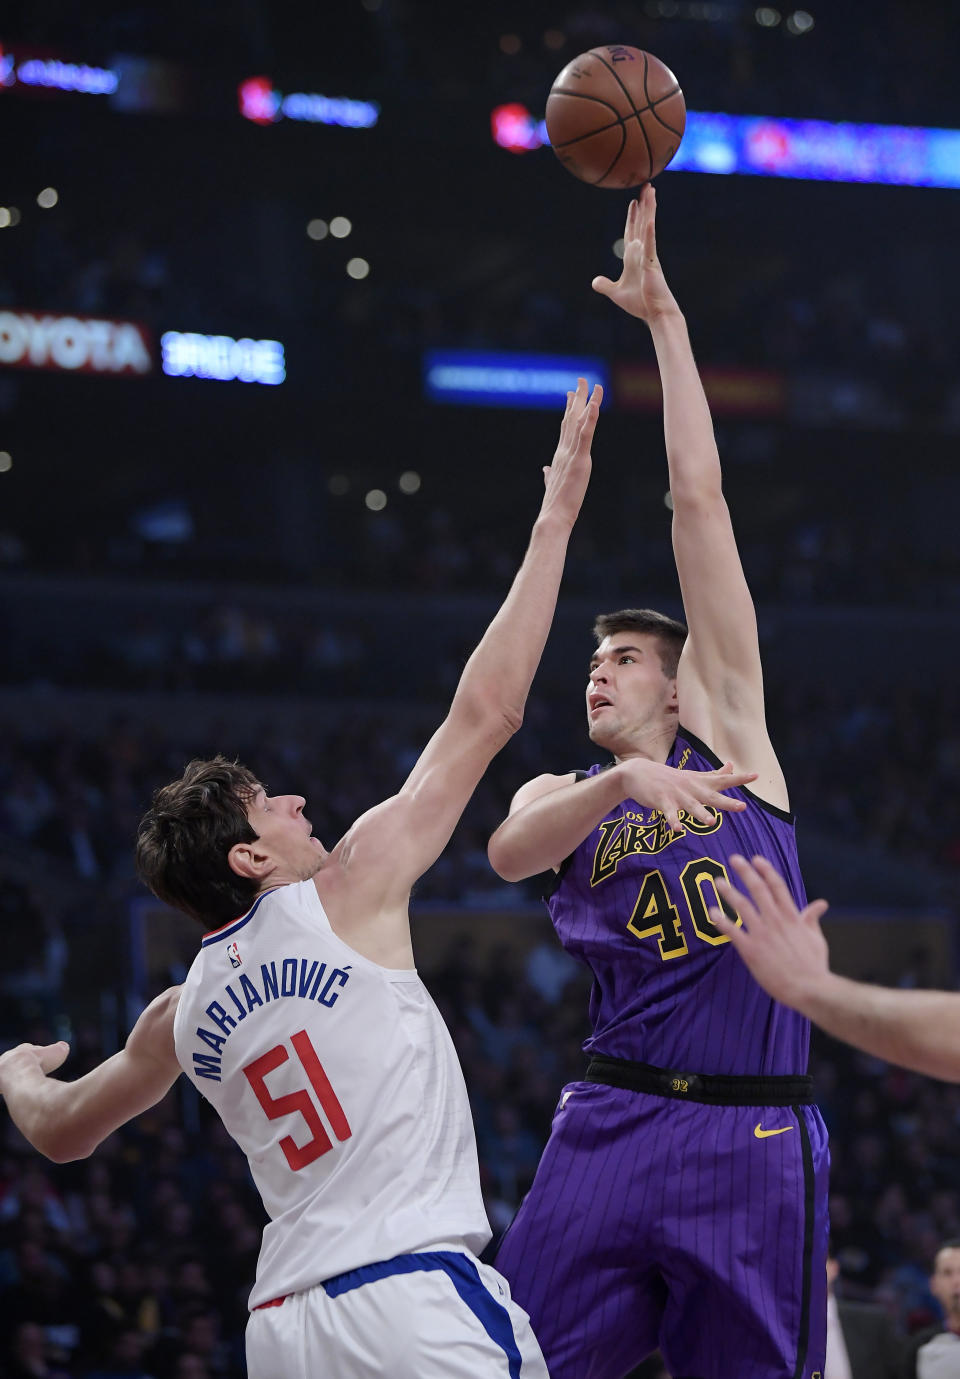 Los Angeles Lakers center Ivica Zubac, right, shoots as Los Angeles Clippers center Boban Marjanovic defends during the first half of an NBA basketball game Friday, Dec. 28, 2018, in Los Angeles. (AP Photo/Mark J. Terrill)